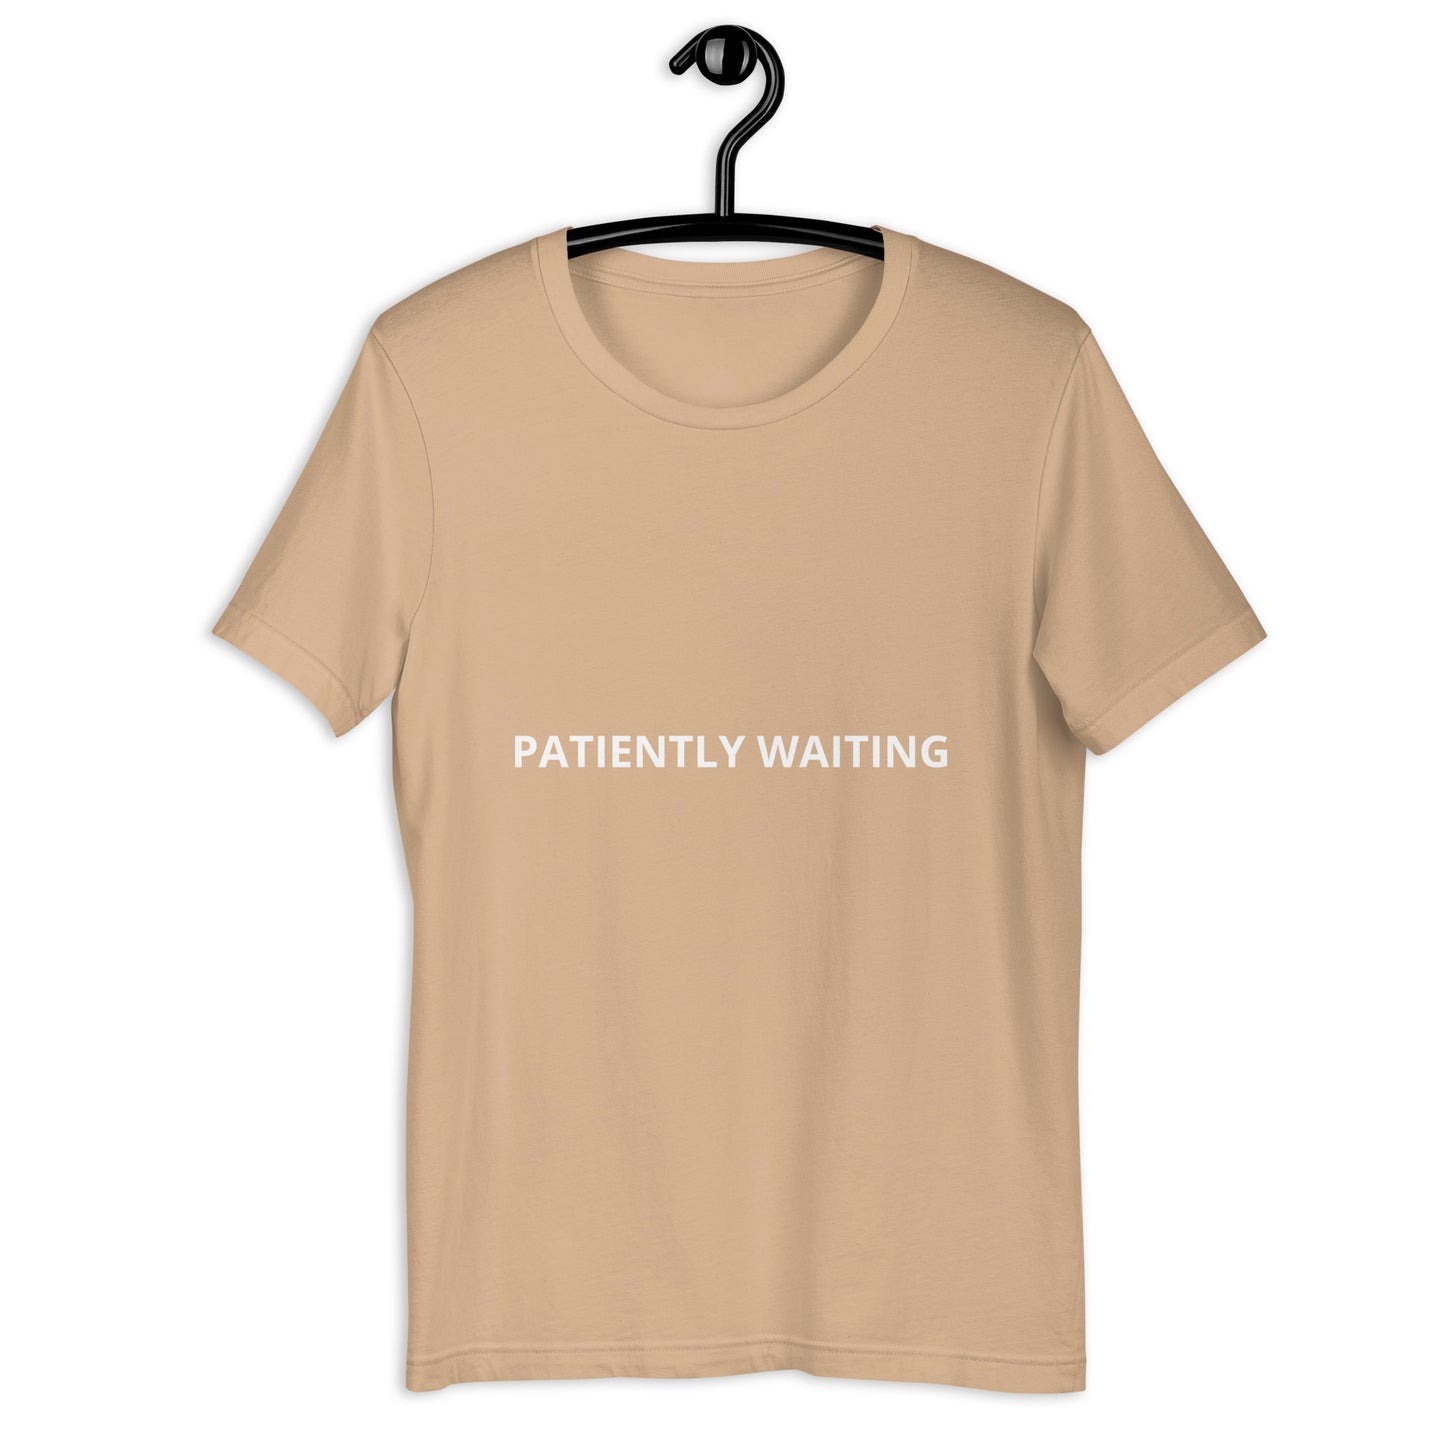 PATIENTLY WAITING Unisex t-shirt